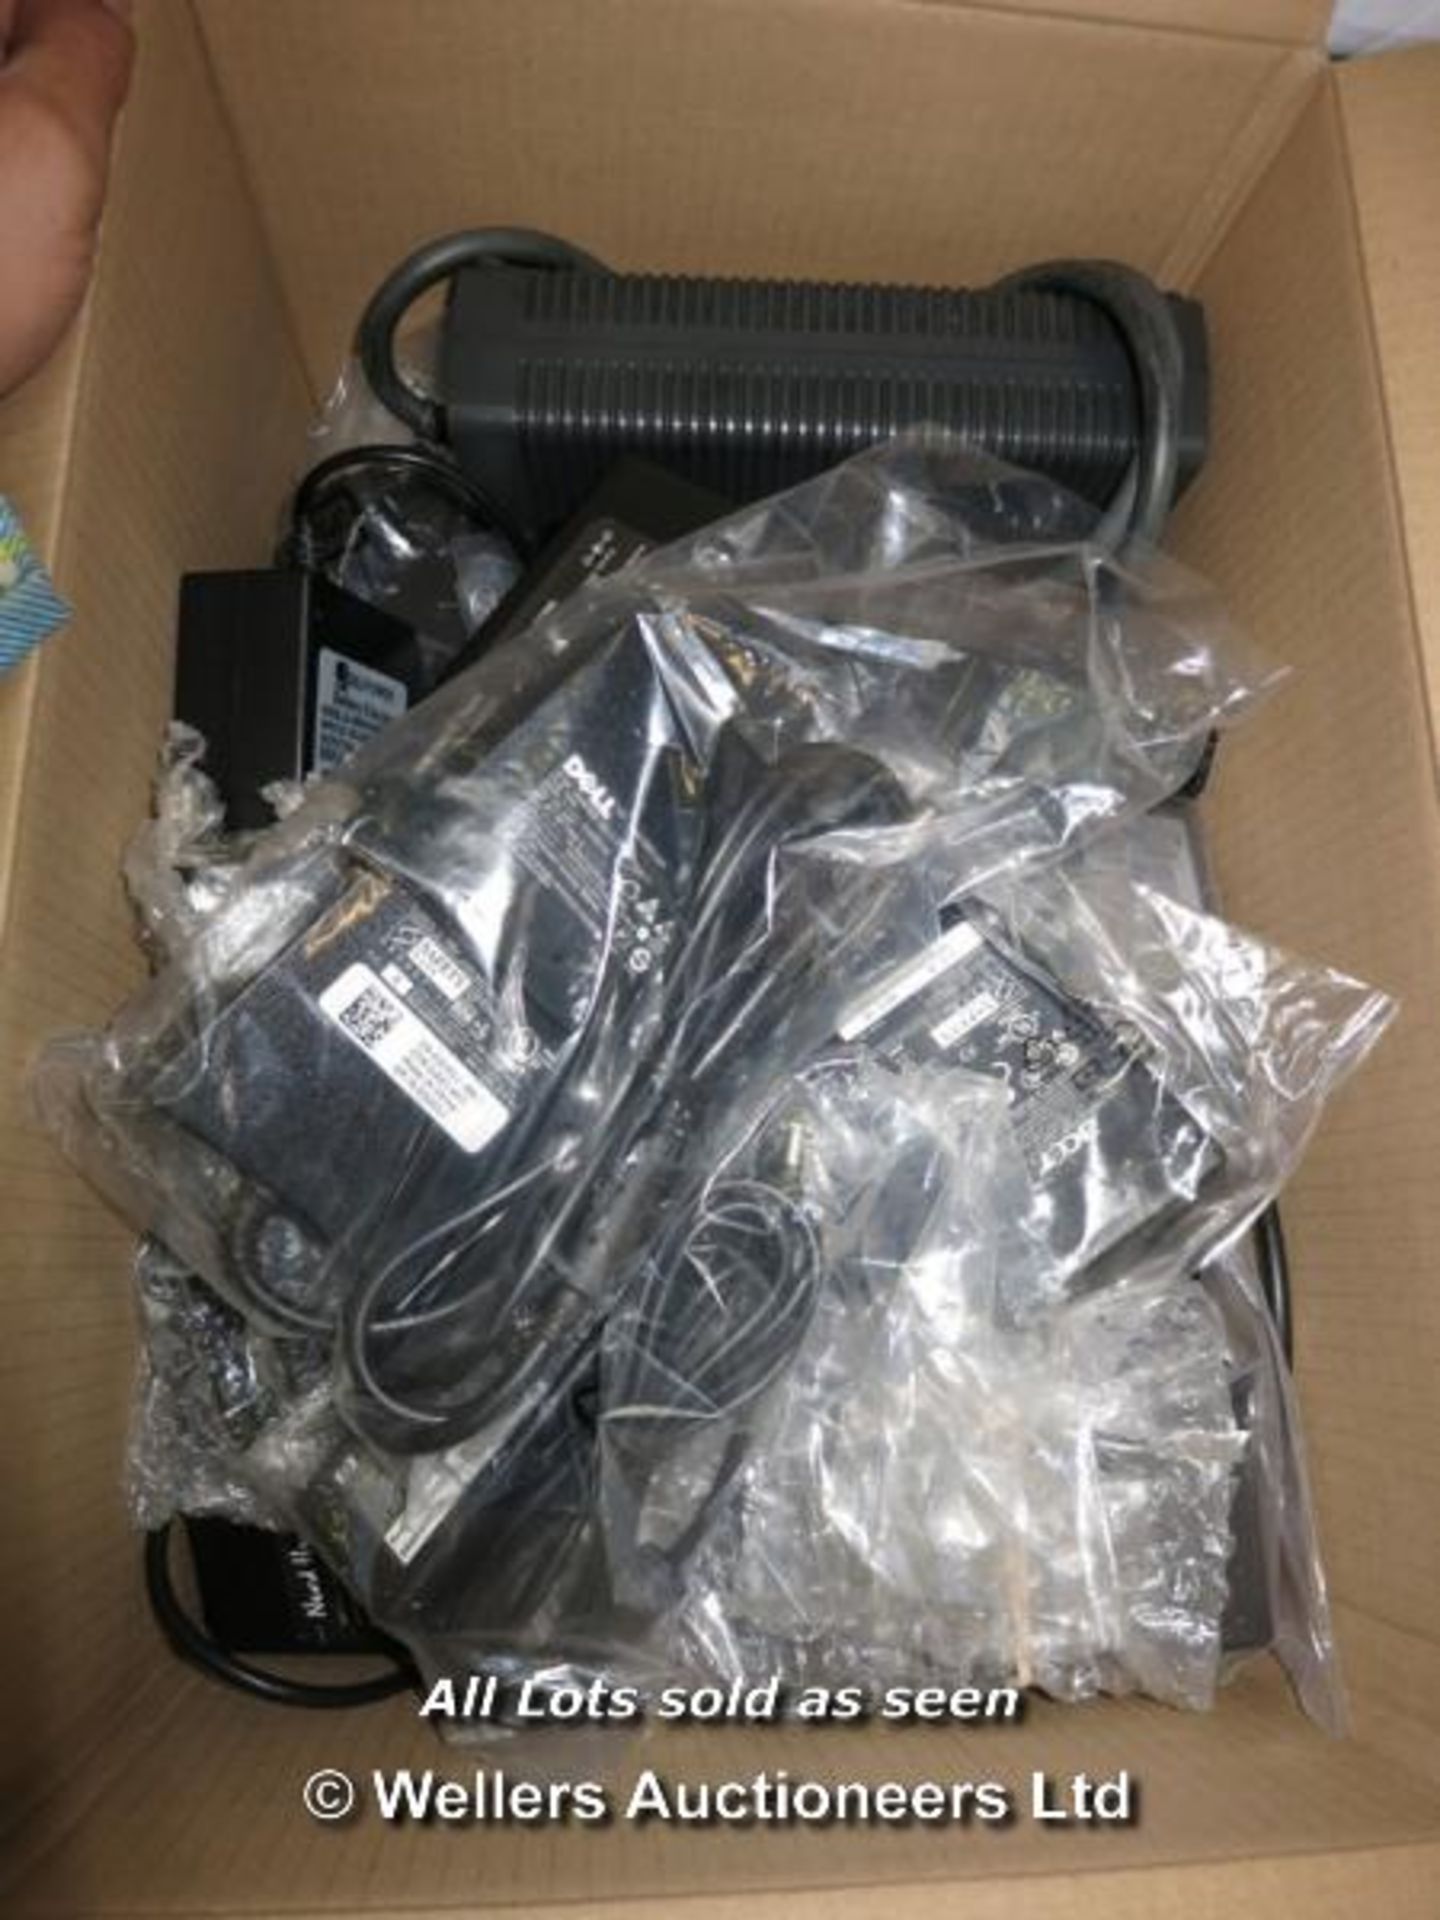 25X POWER PACKS (LOOSE) INC:DELL, HP, ACER / GRADE: UNCLAIMED PROPERTY / UNBOXED (DC2){